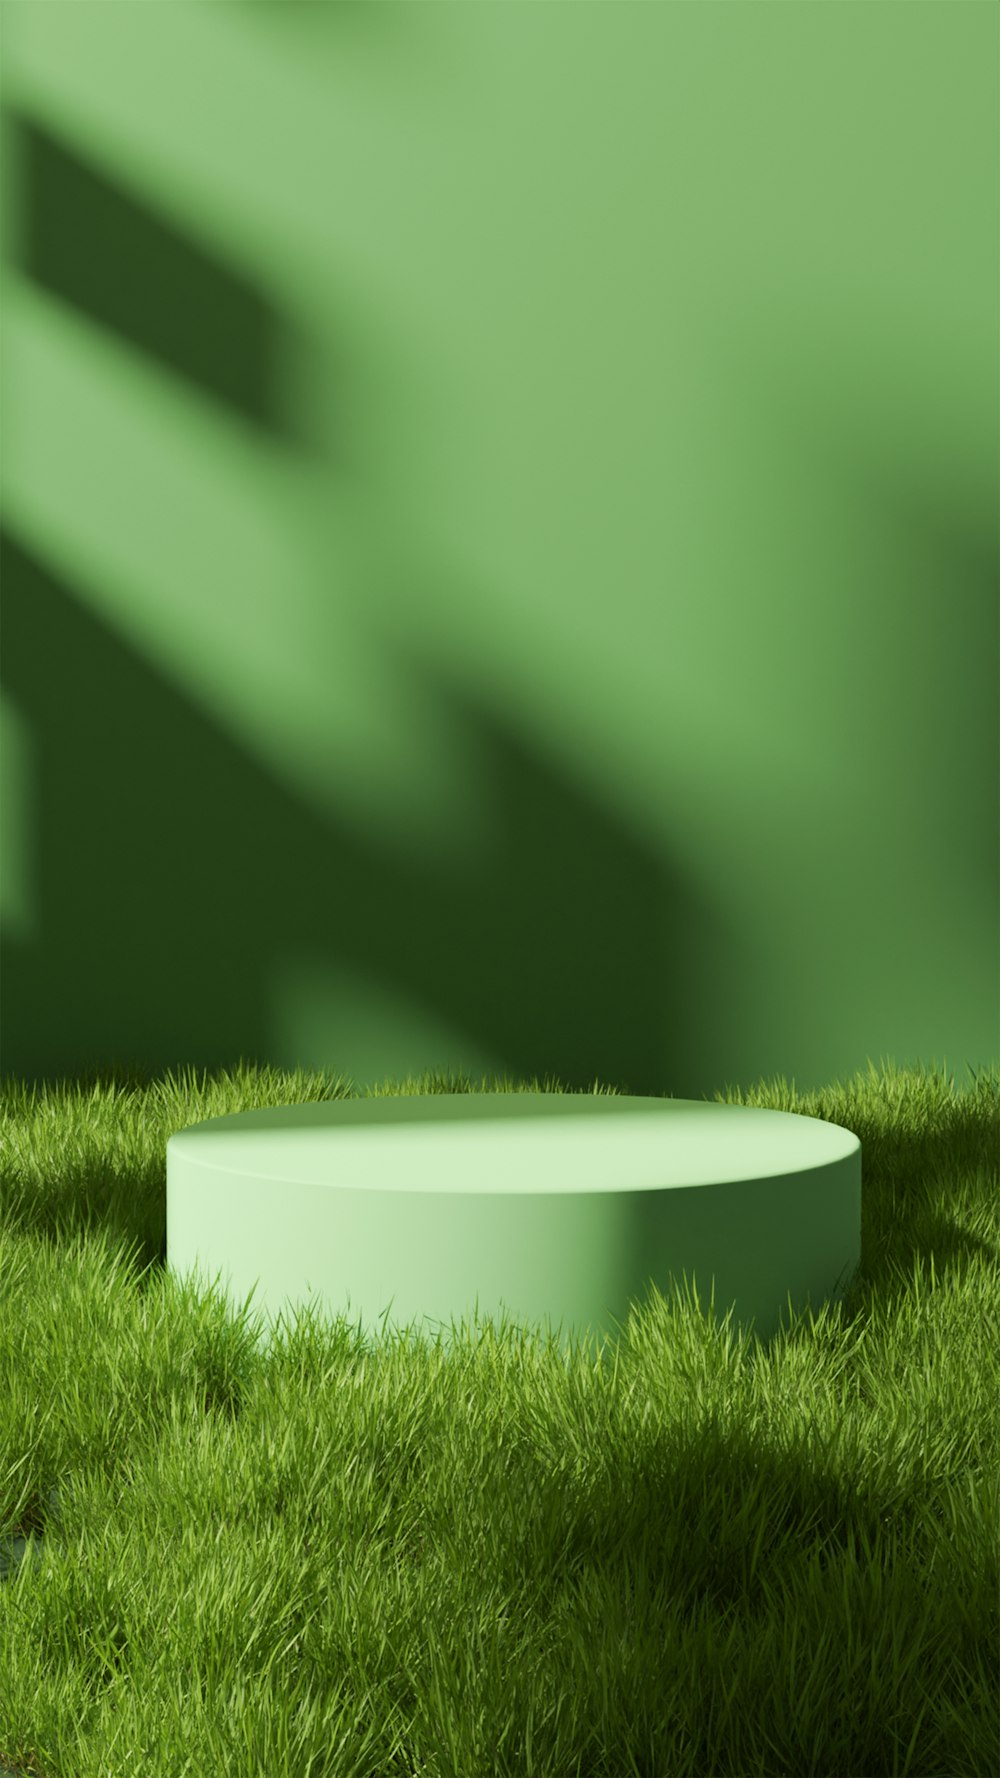 a circular object sitting in the middle of some grass